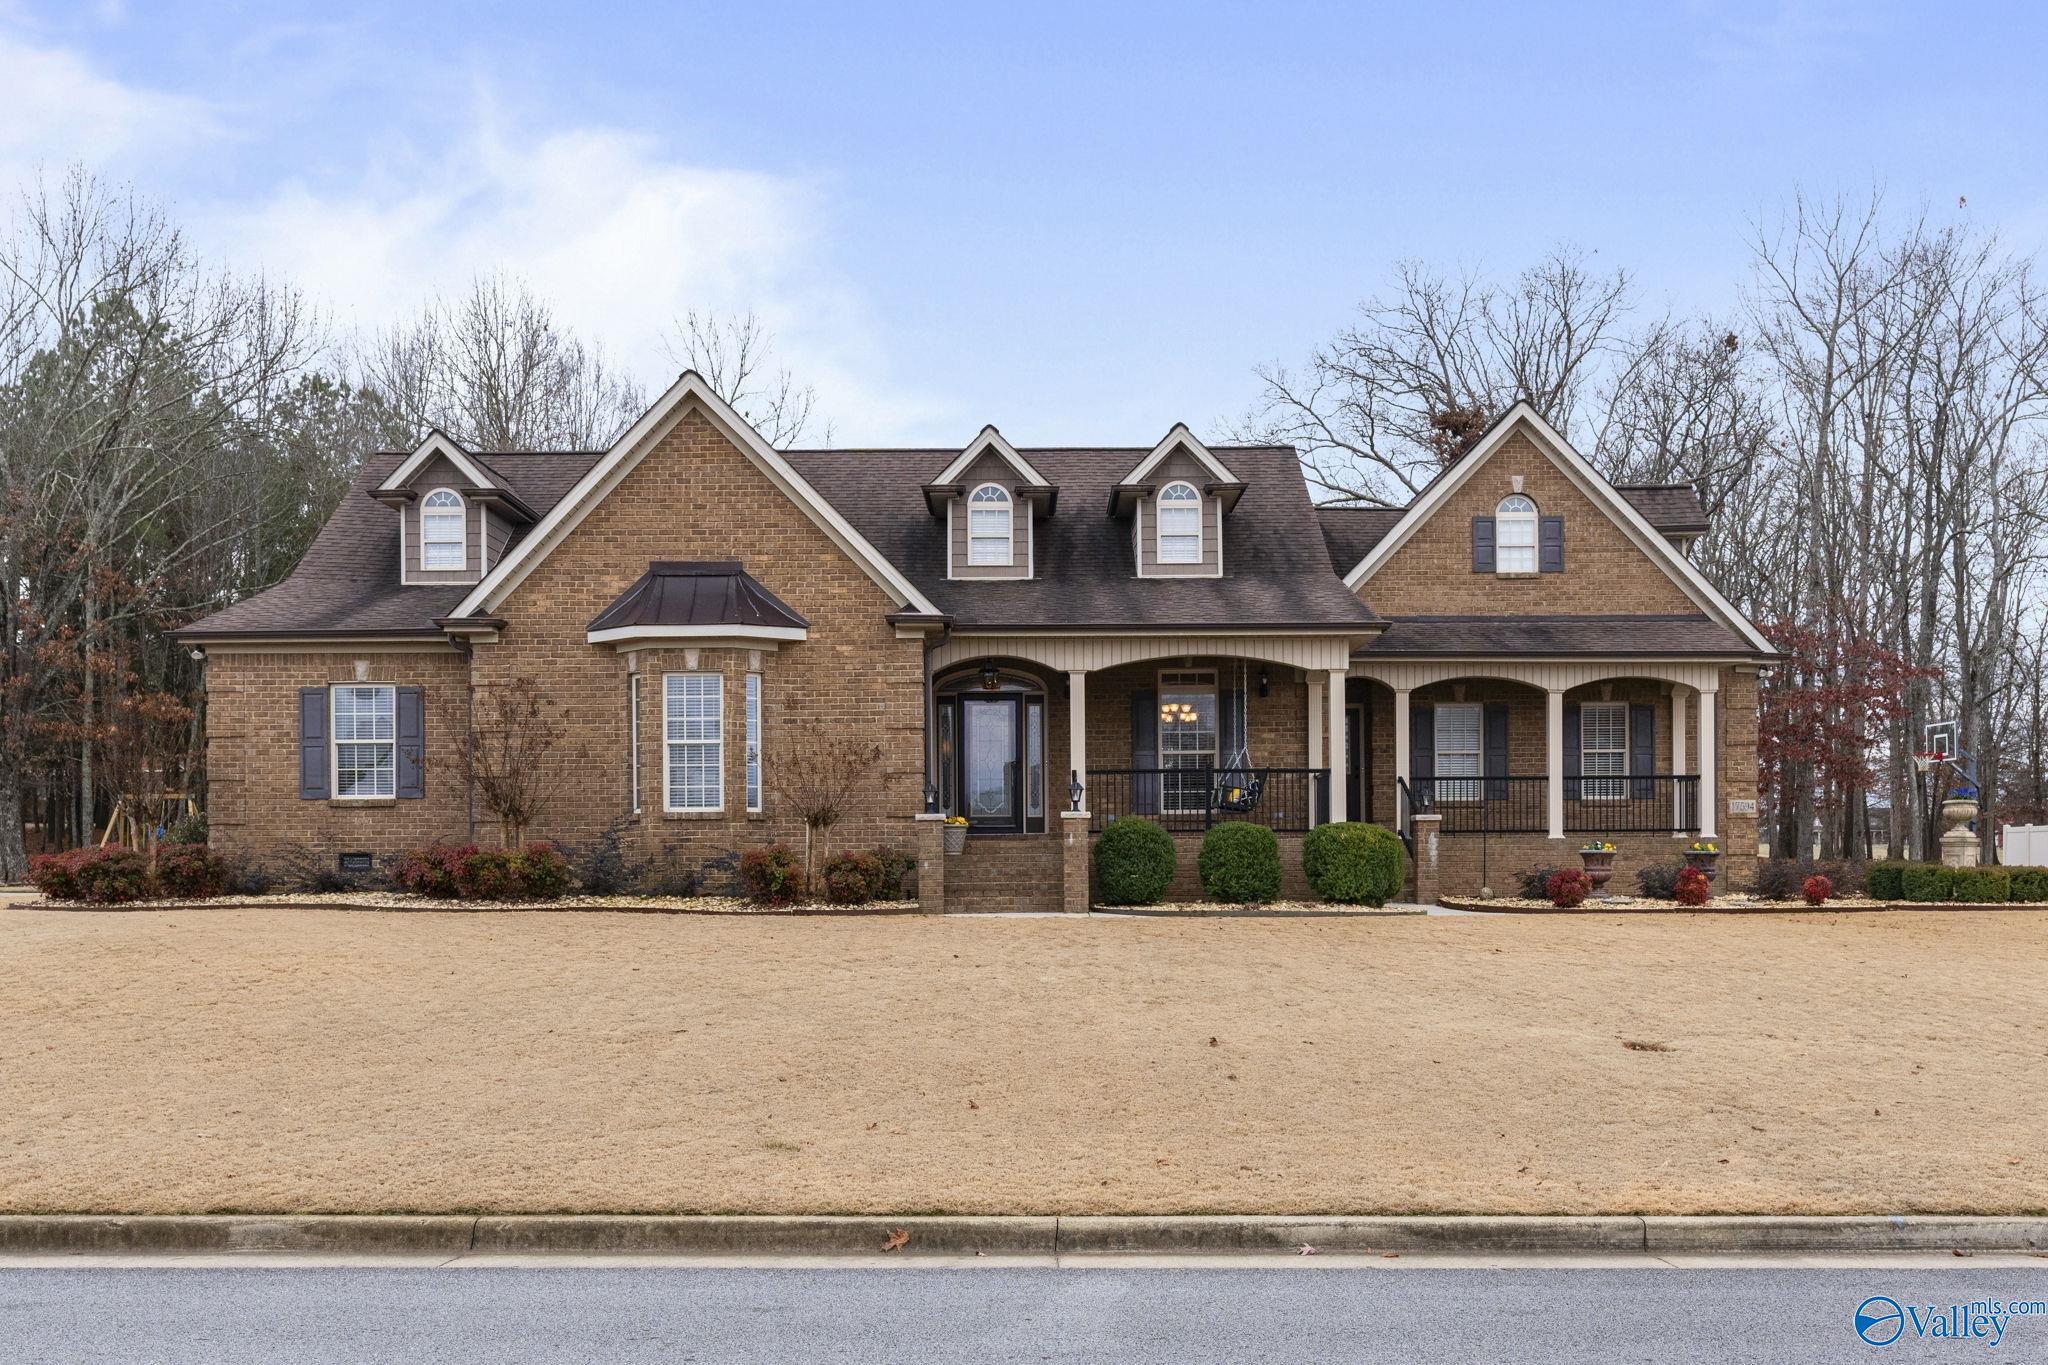 Property: 17594 Clearview Street,Athens, AL